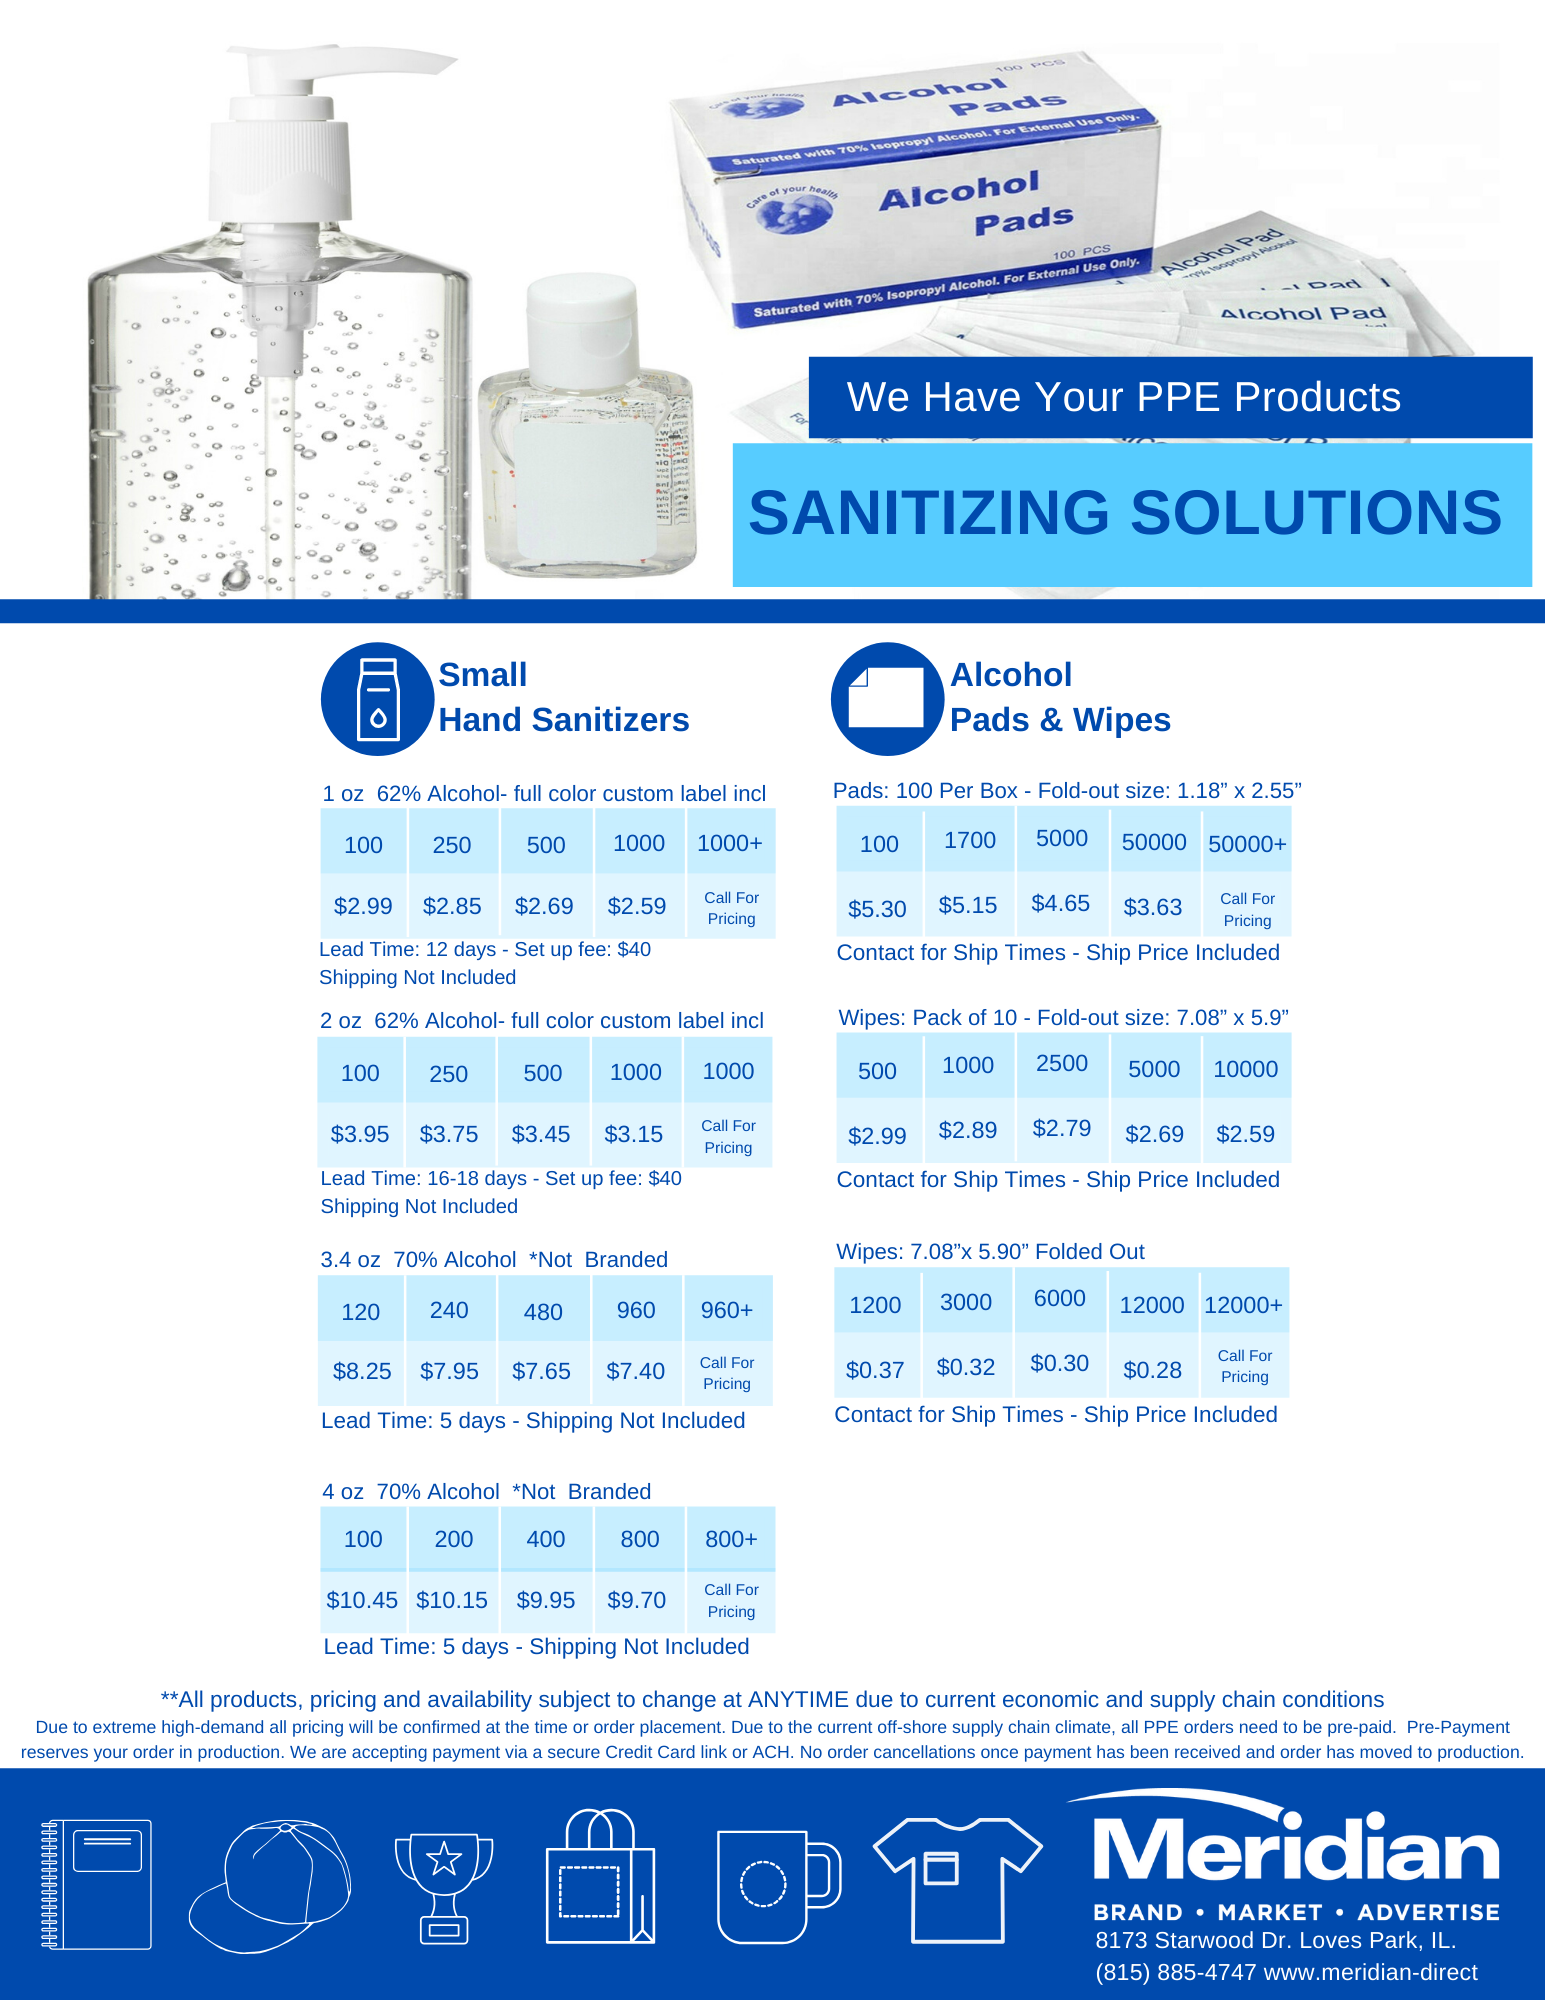 sanitizers-alcohol-wipes-pads